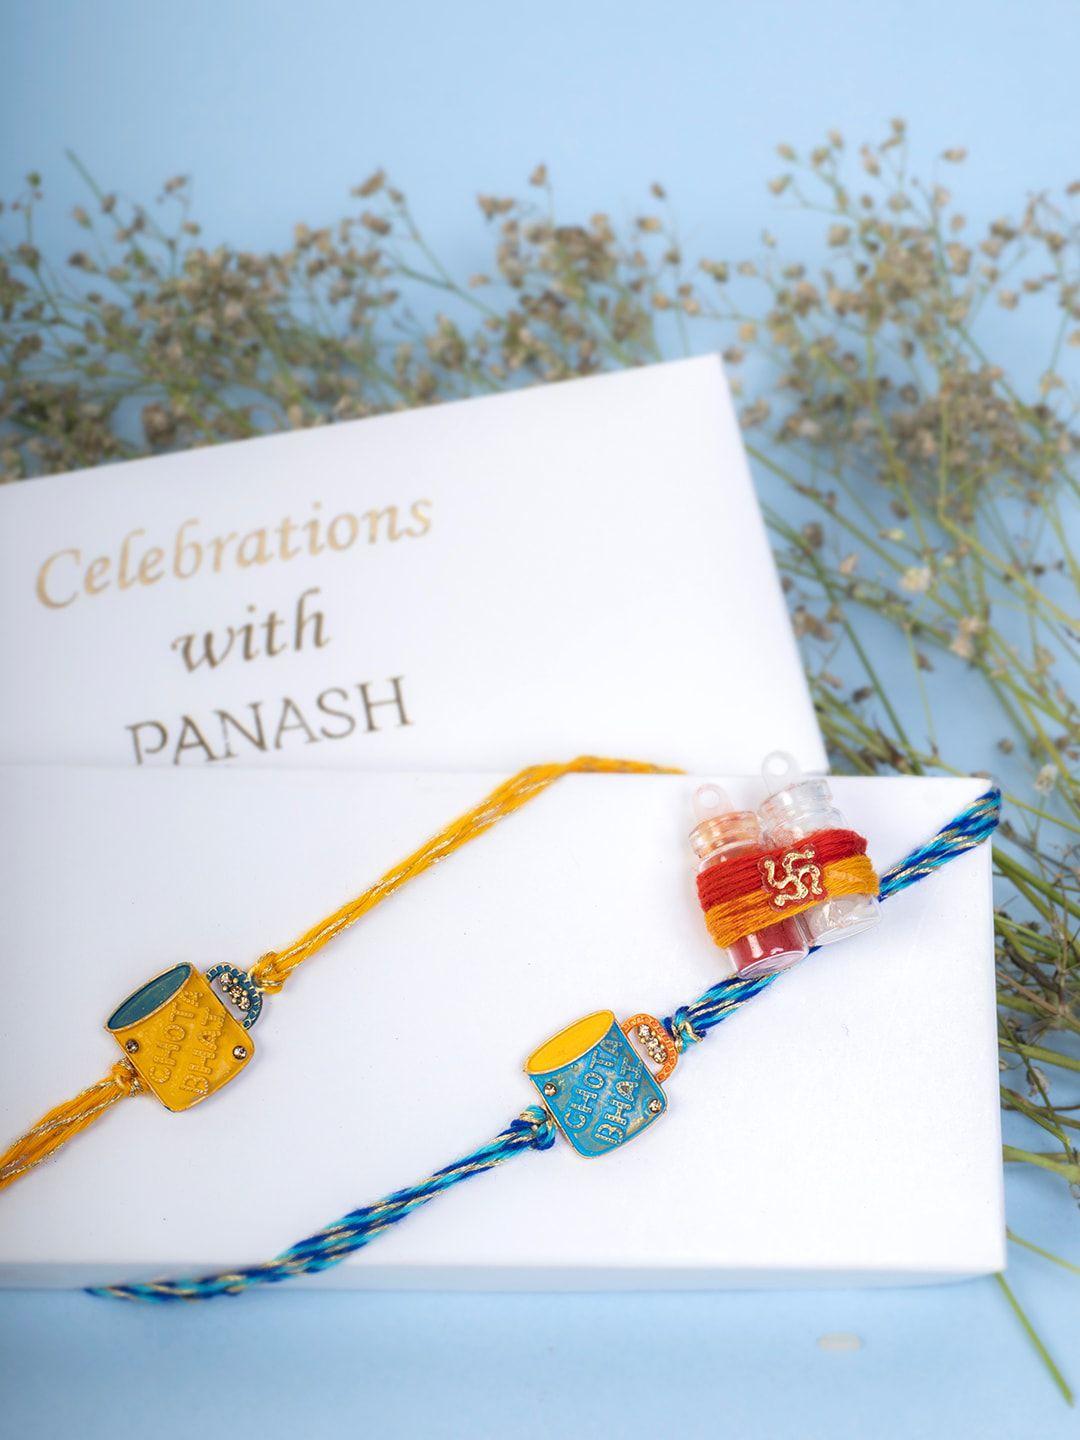 panash kids set of 2 gold-plated cup-shaped thread rakhi with roli chawal